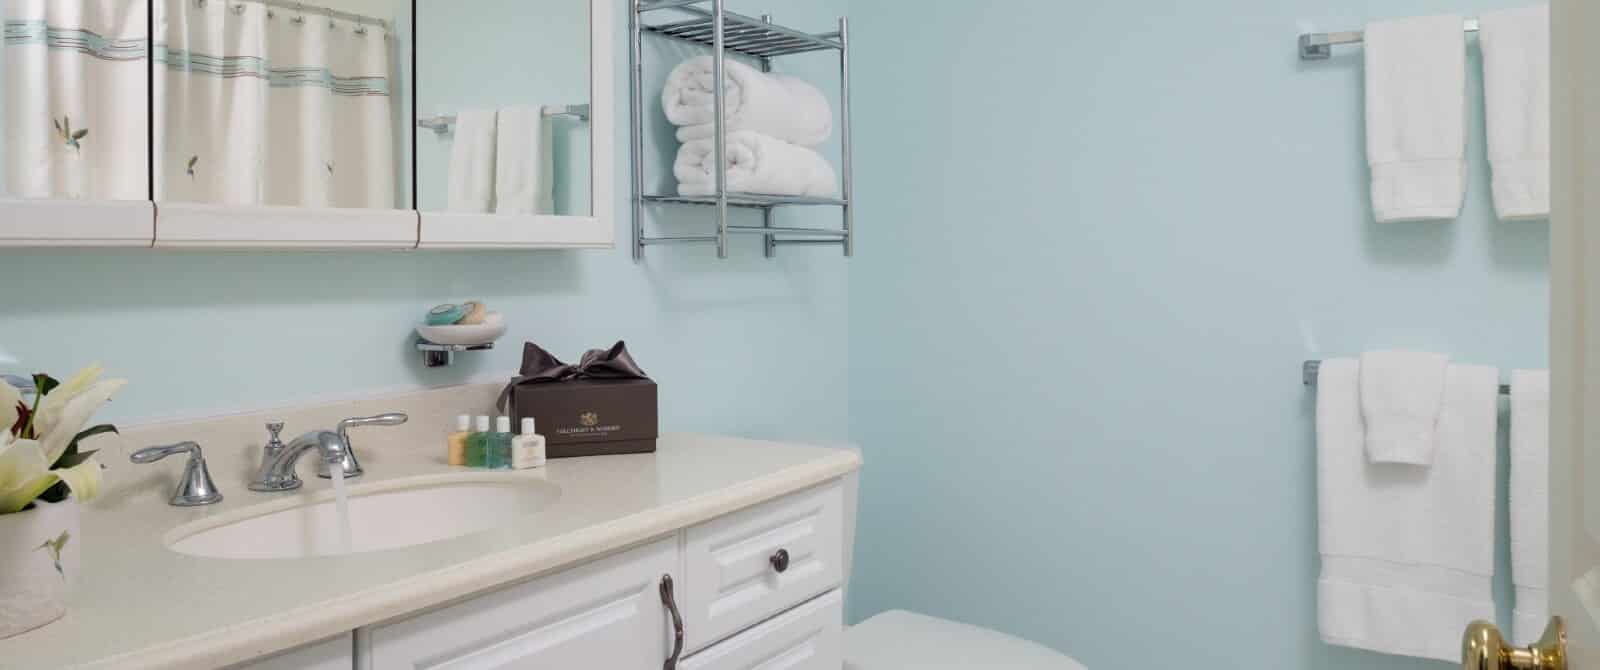 Bathroom with single sink, pale blue walls, white hanging and rolled towels and large framed mirror